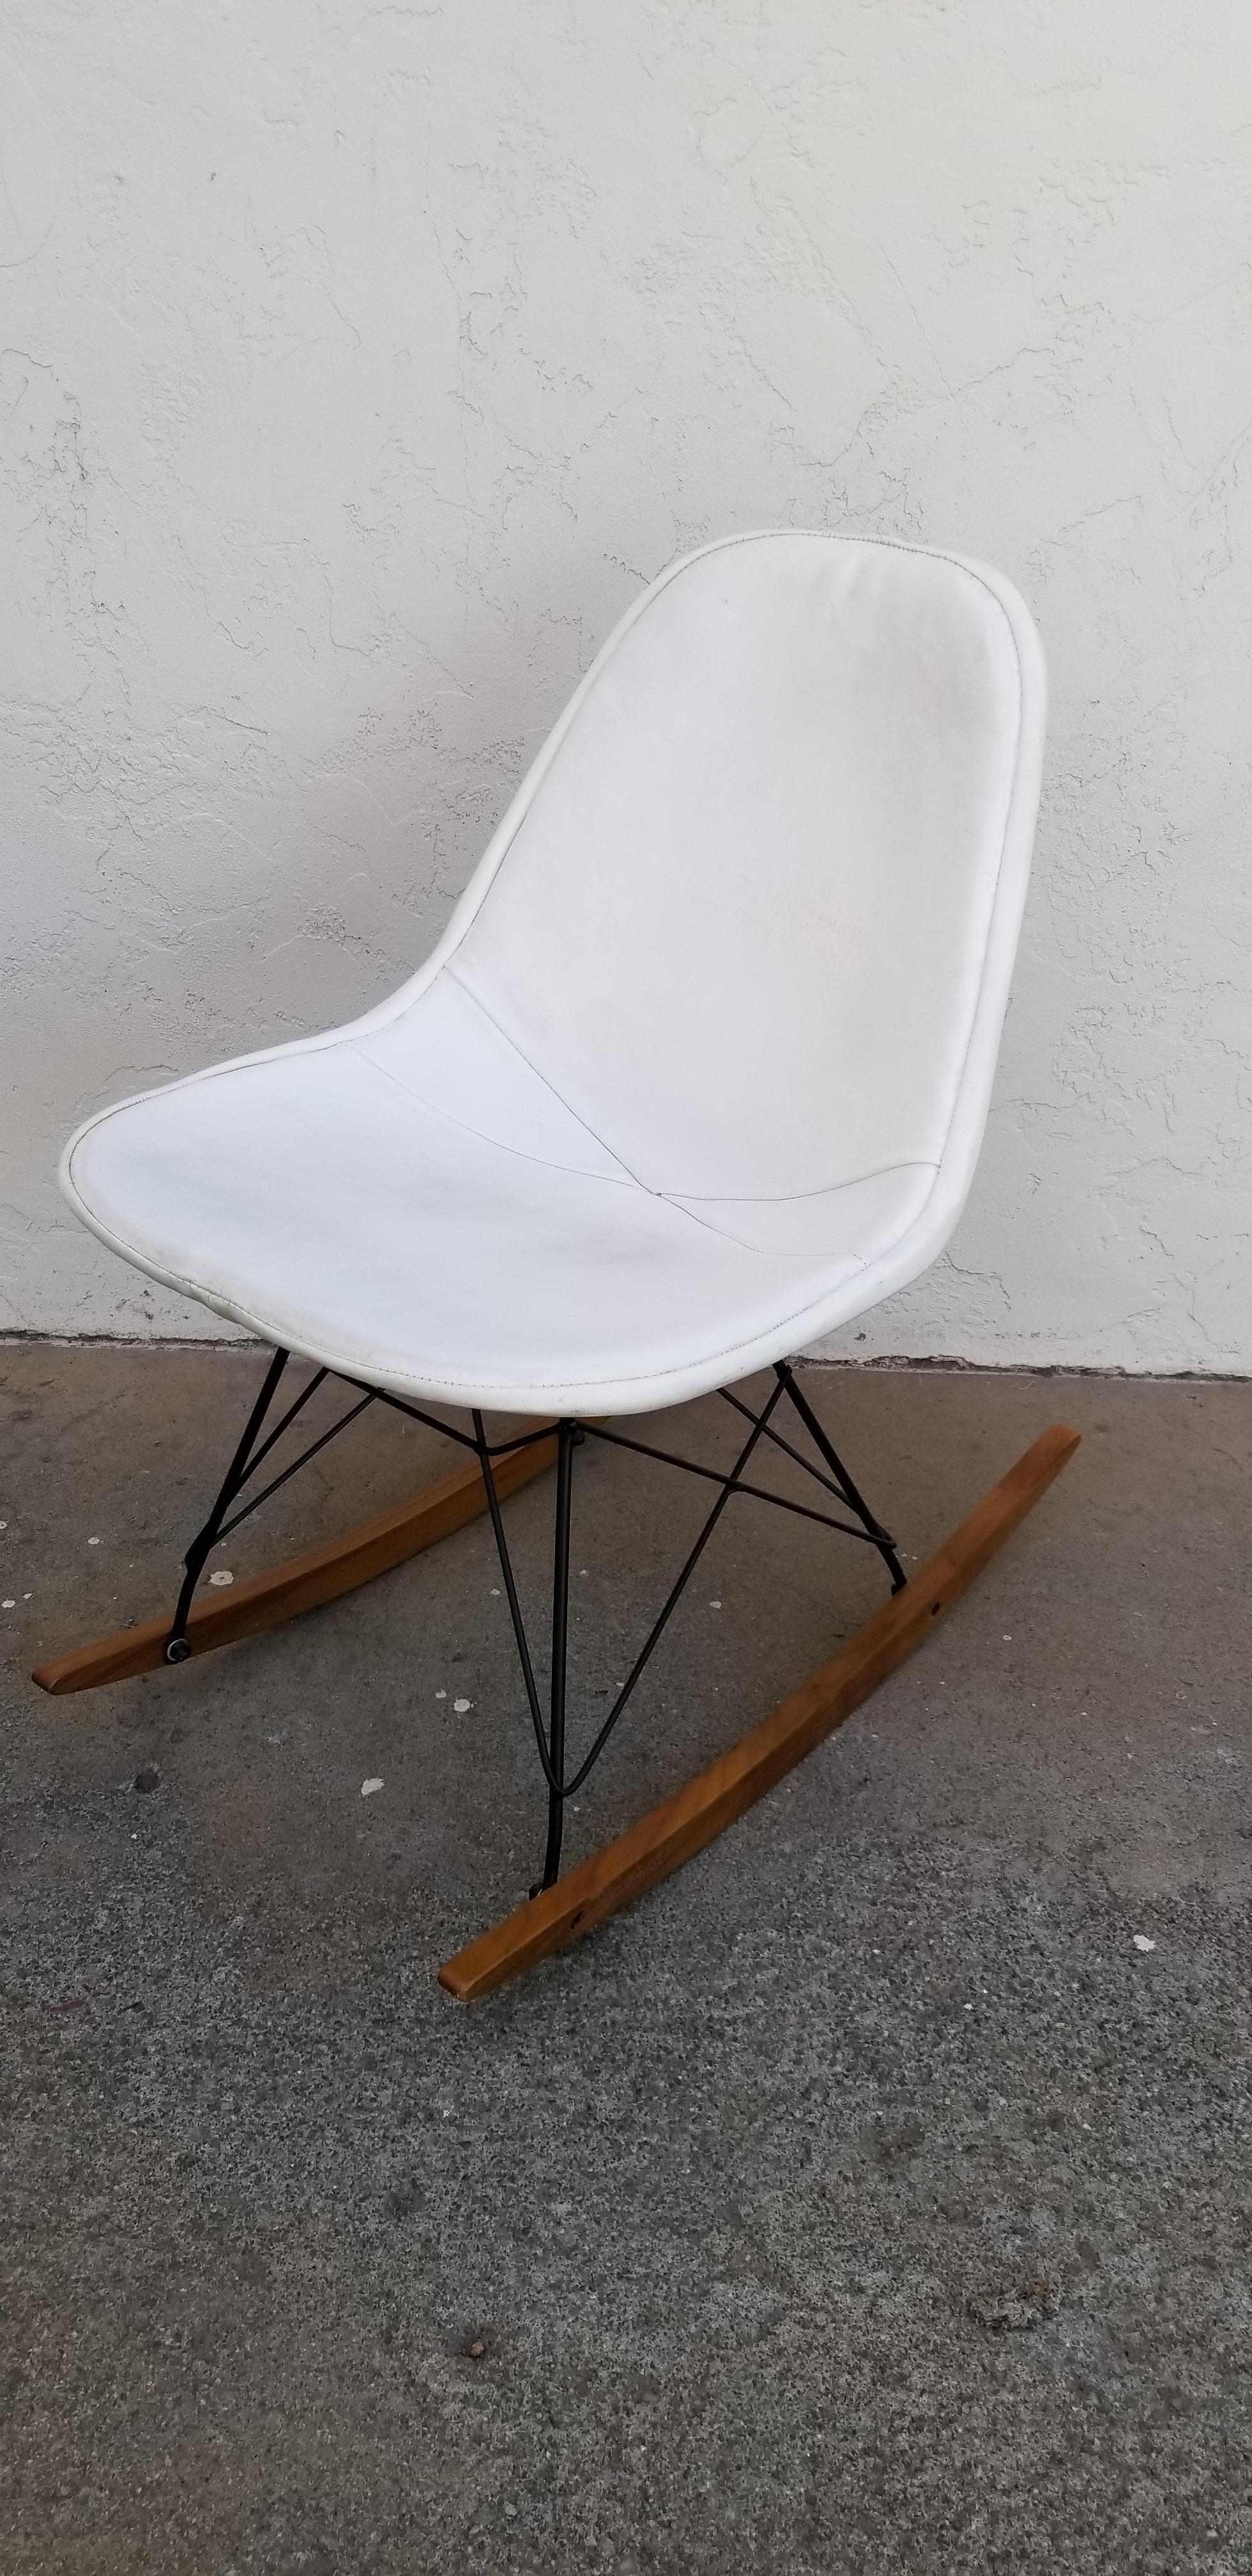 Vintage Herman Miller seat with original Naugahyde cover. Wire base is an aftermarket, replacement. Bold black and white contrasting colors. Age appropriate wear to Naugahyde. An opportunity to have a classic and scarce Eames wire rocker without